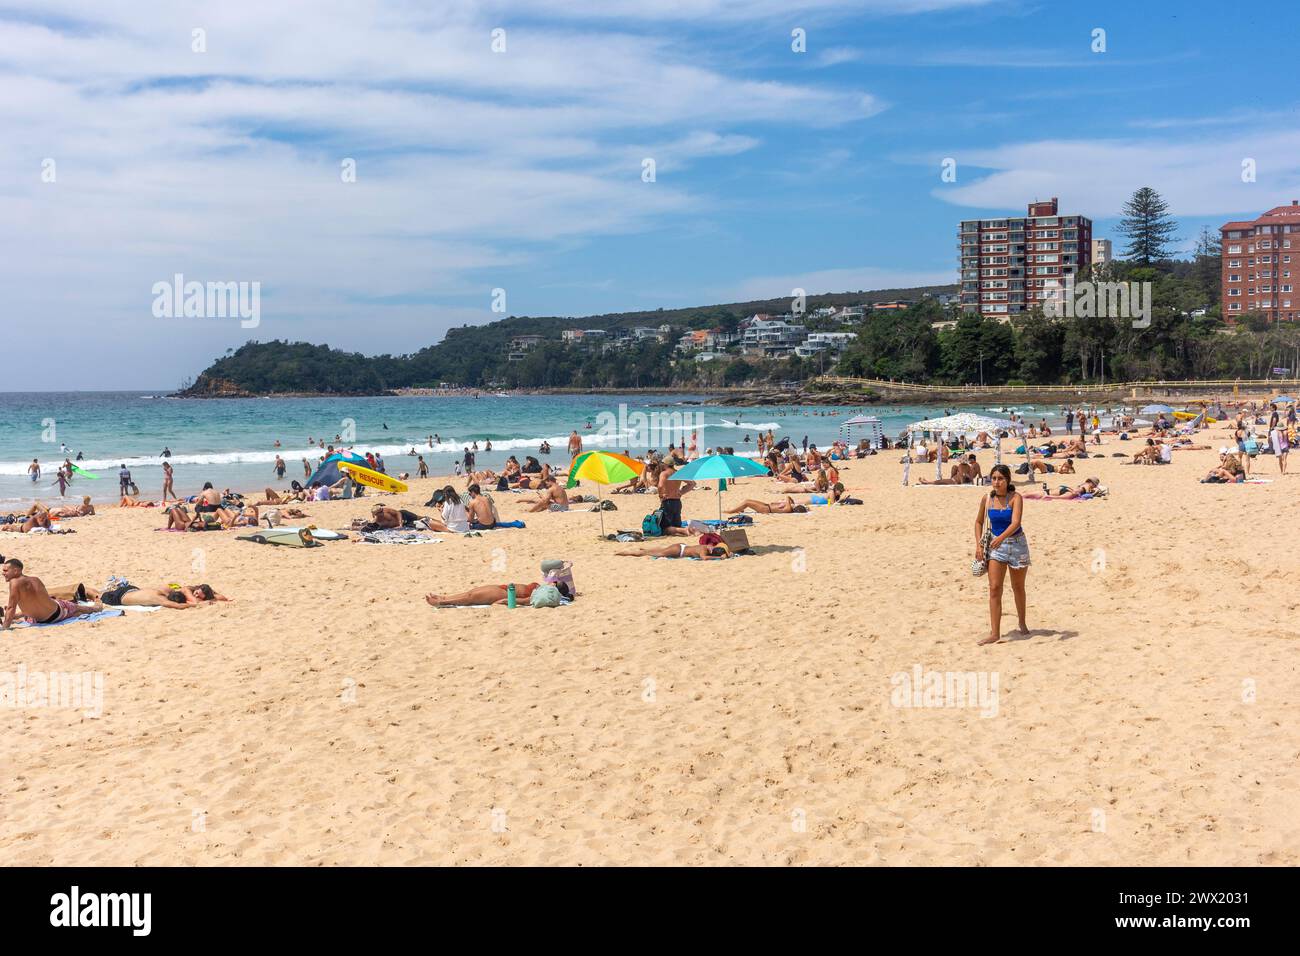 Manly Beach, Manly, North Sydney, Sydney, New South Wales, Australien Stockfoto